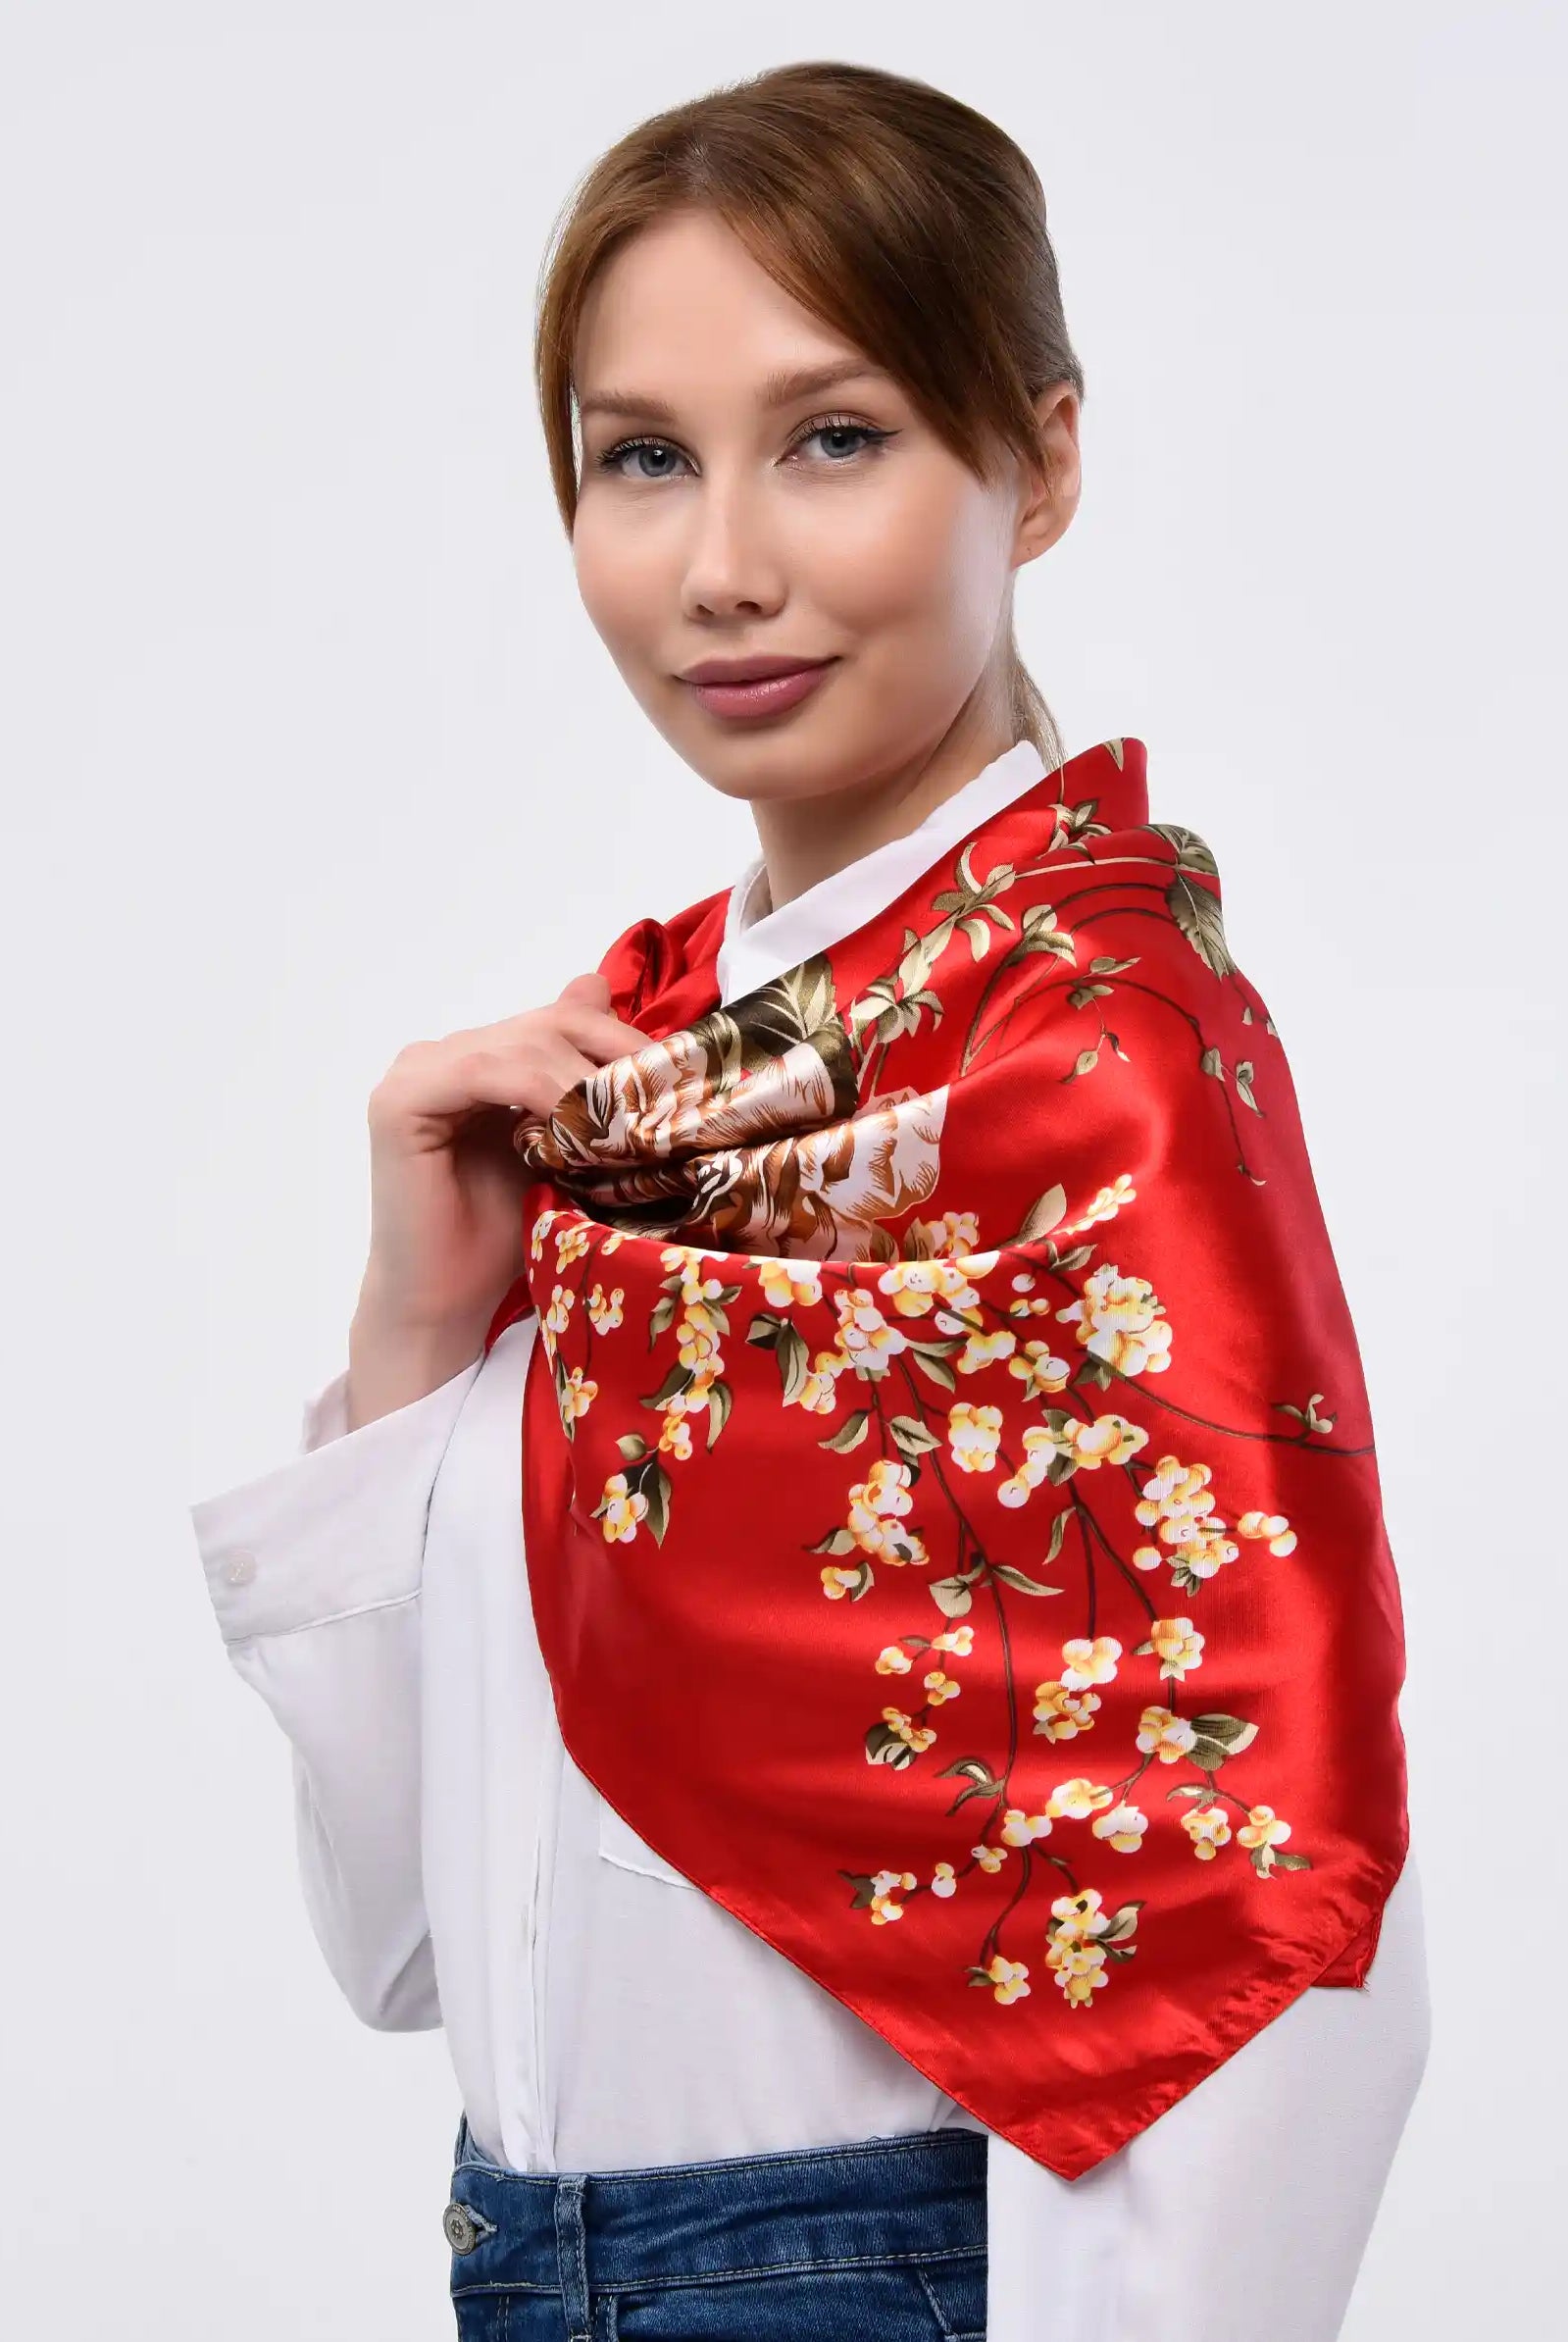 Red floral silk scarf is worn by a lady.